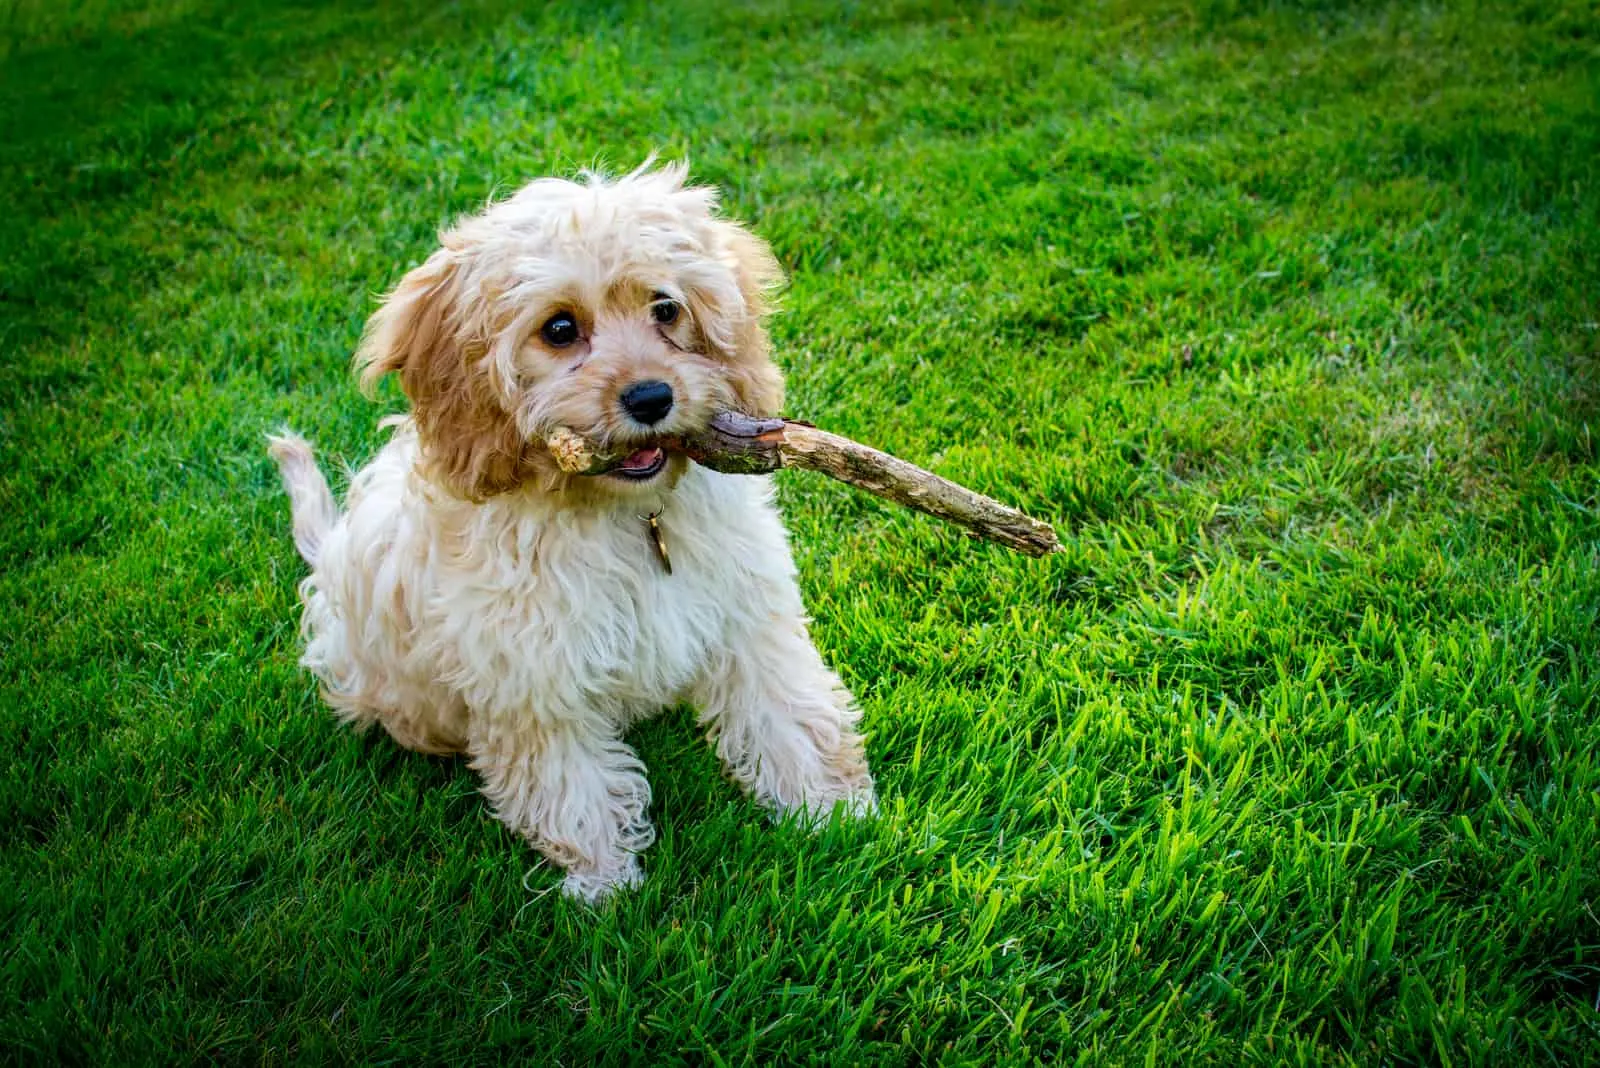 Cavapoo puppy with stick in his mouth